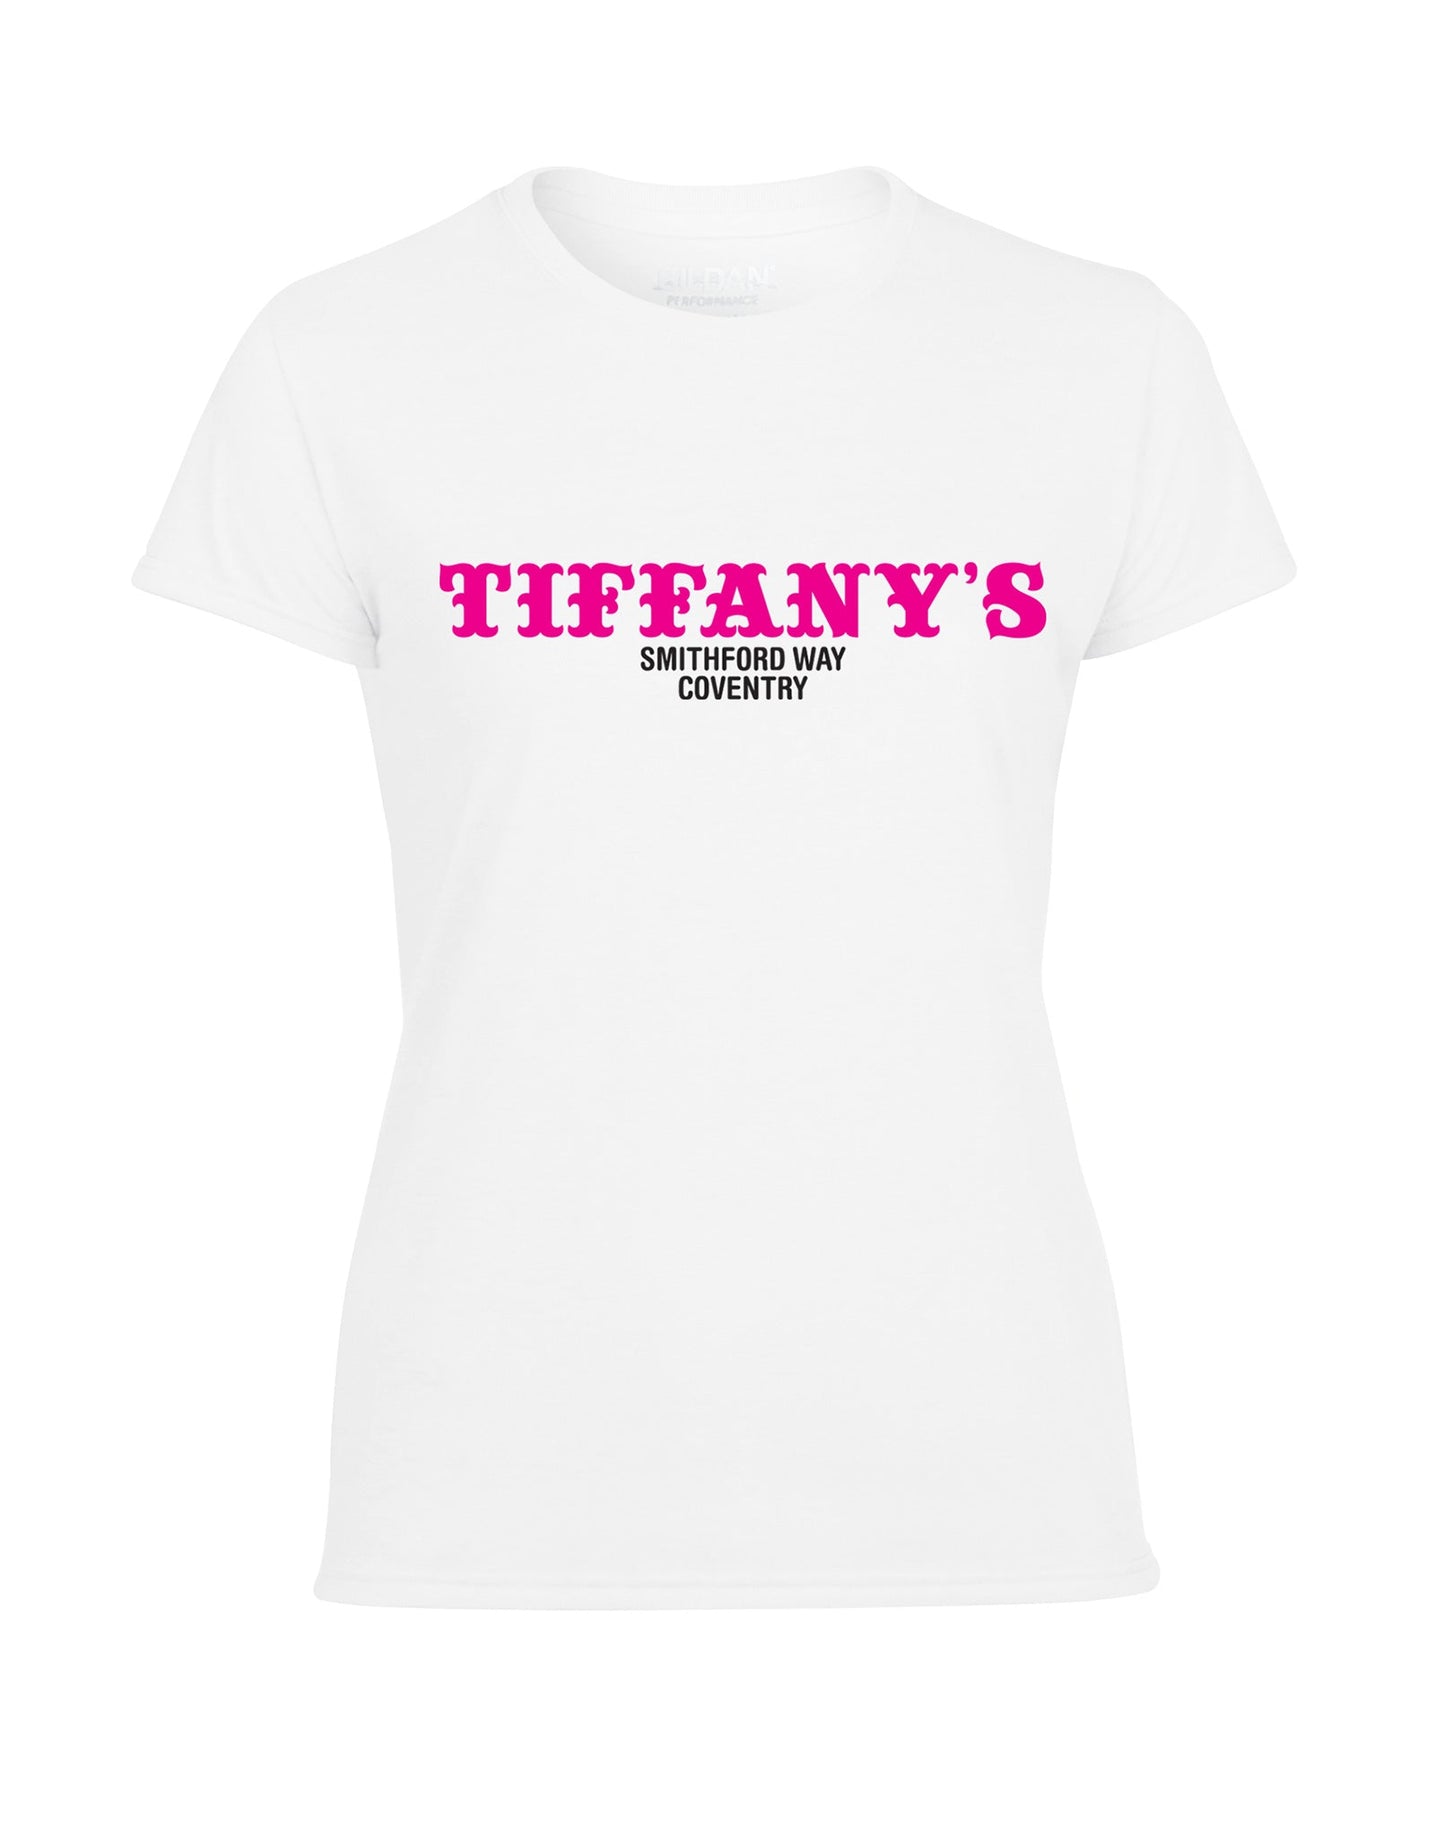 Tiffany's Coventry ladies fit t-shirt - various colours - Dirty Stop Outs